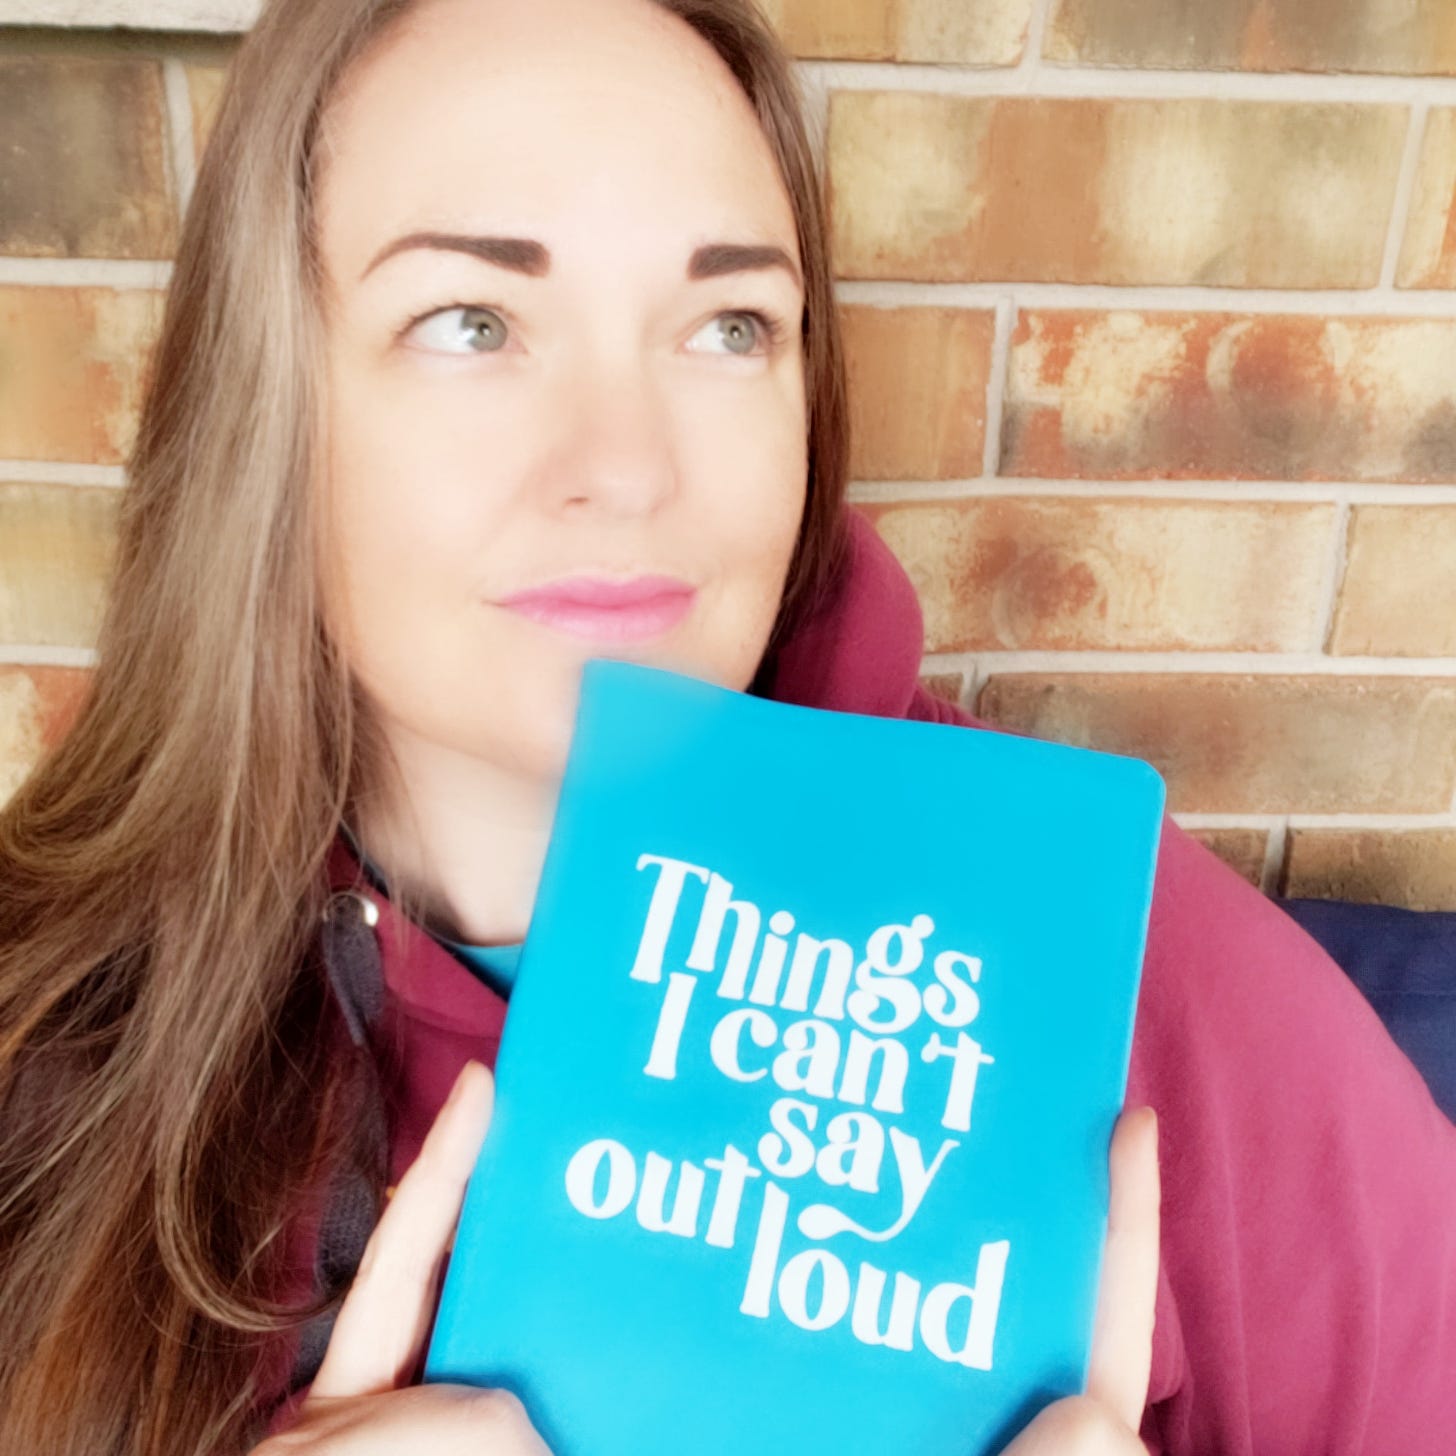 a white woman, me, sits in front of a brick wall and holds a book with the cover "Things I can't Say Out Loud"